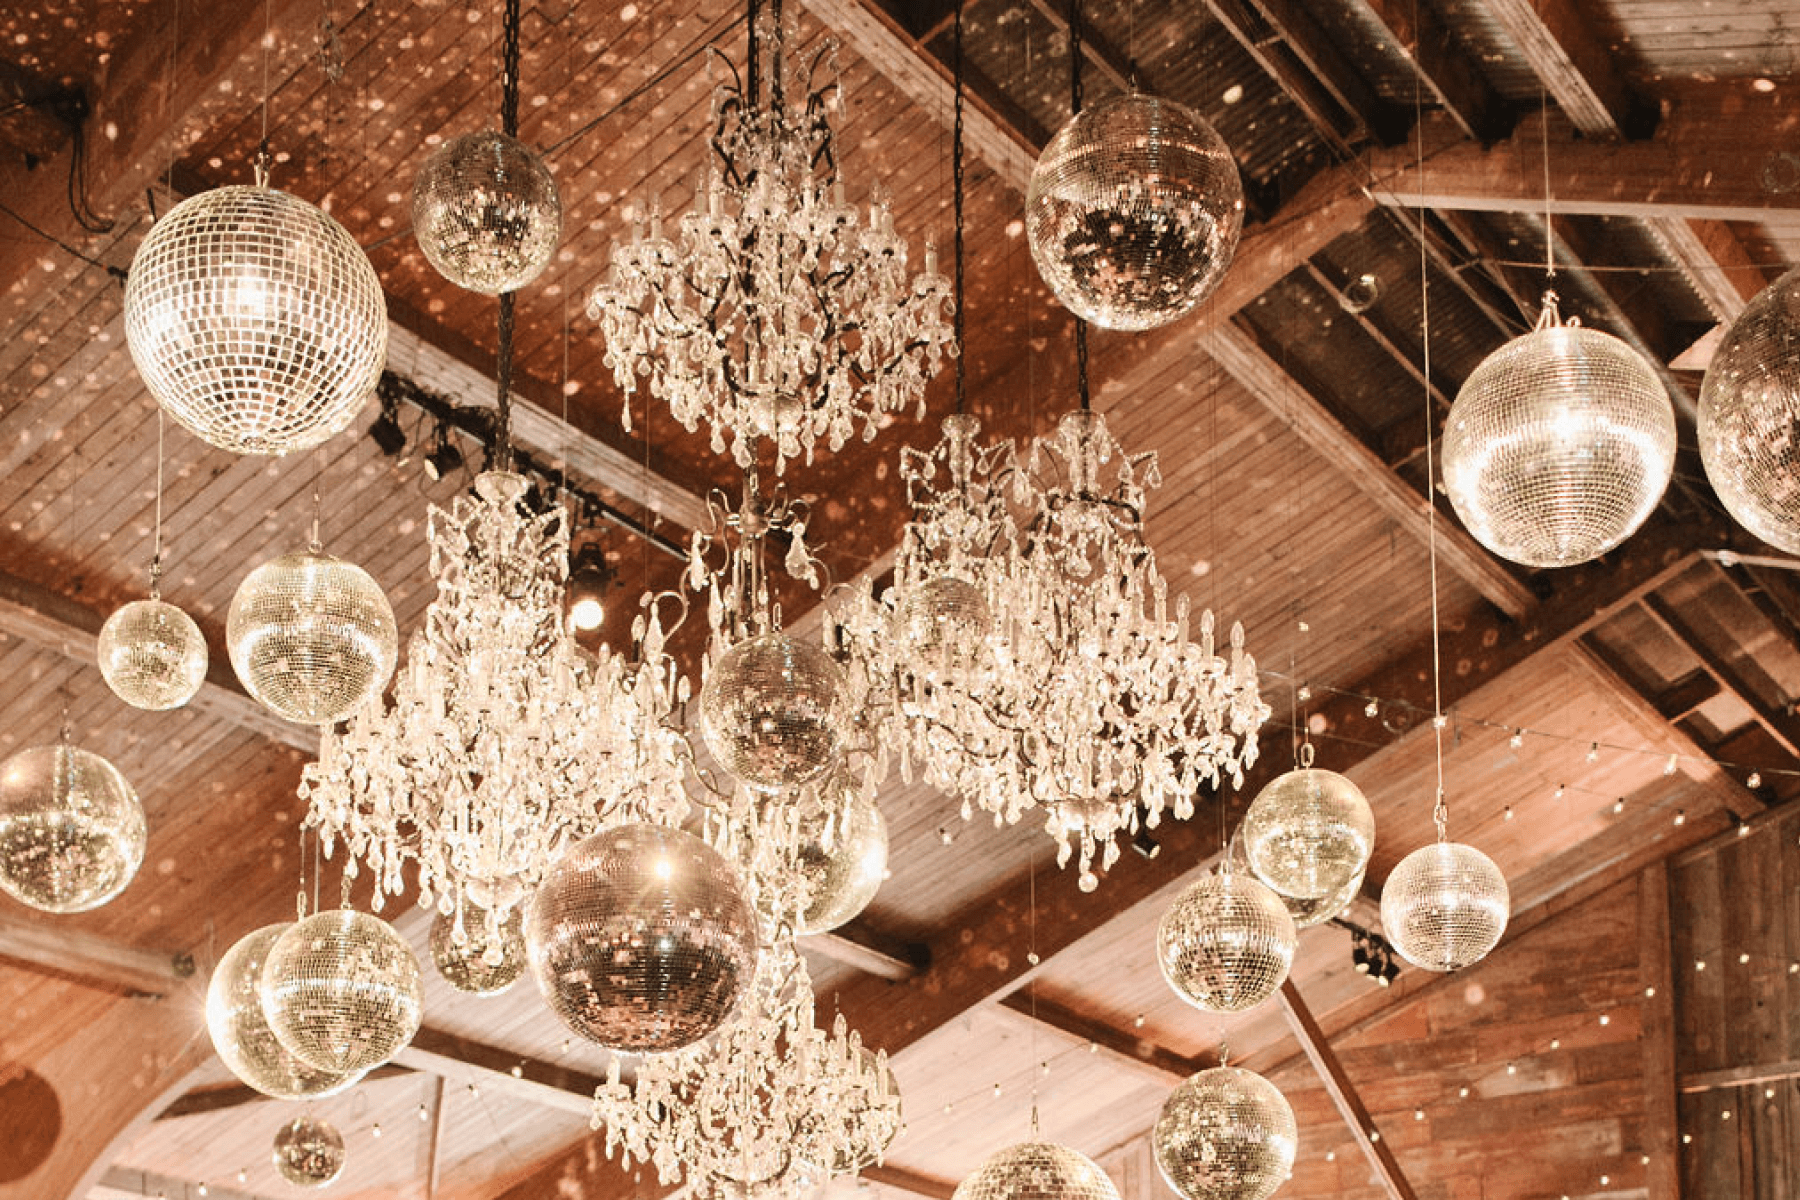 Chandeliers and disco balls hang from a wooden ceiling.